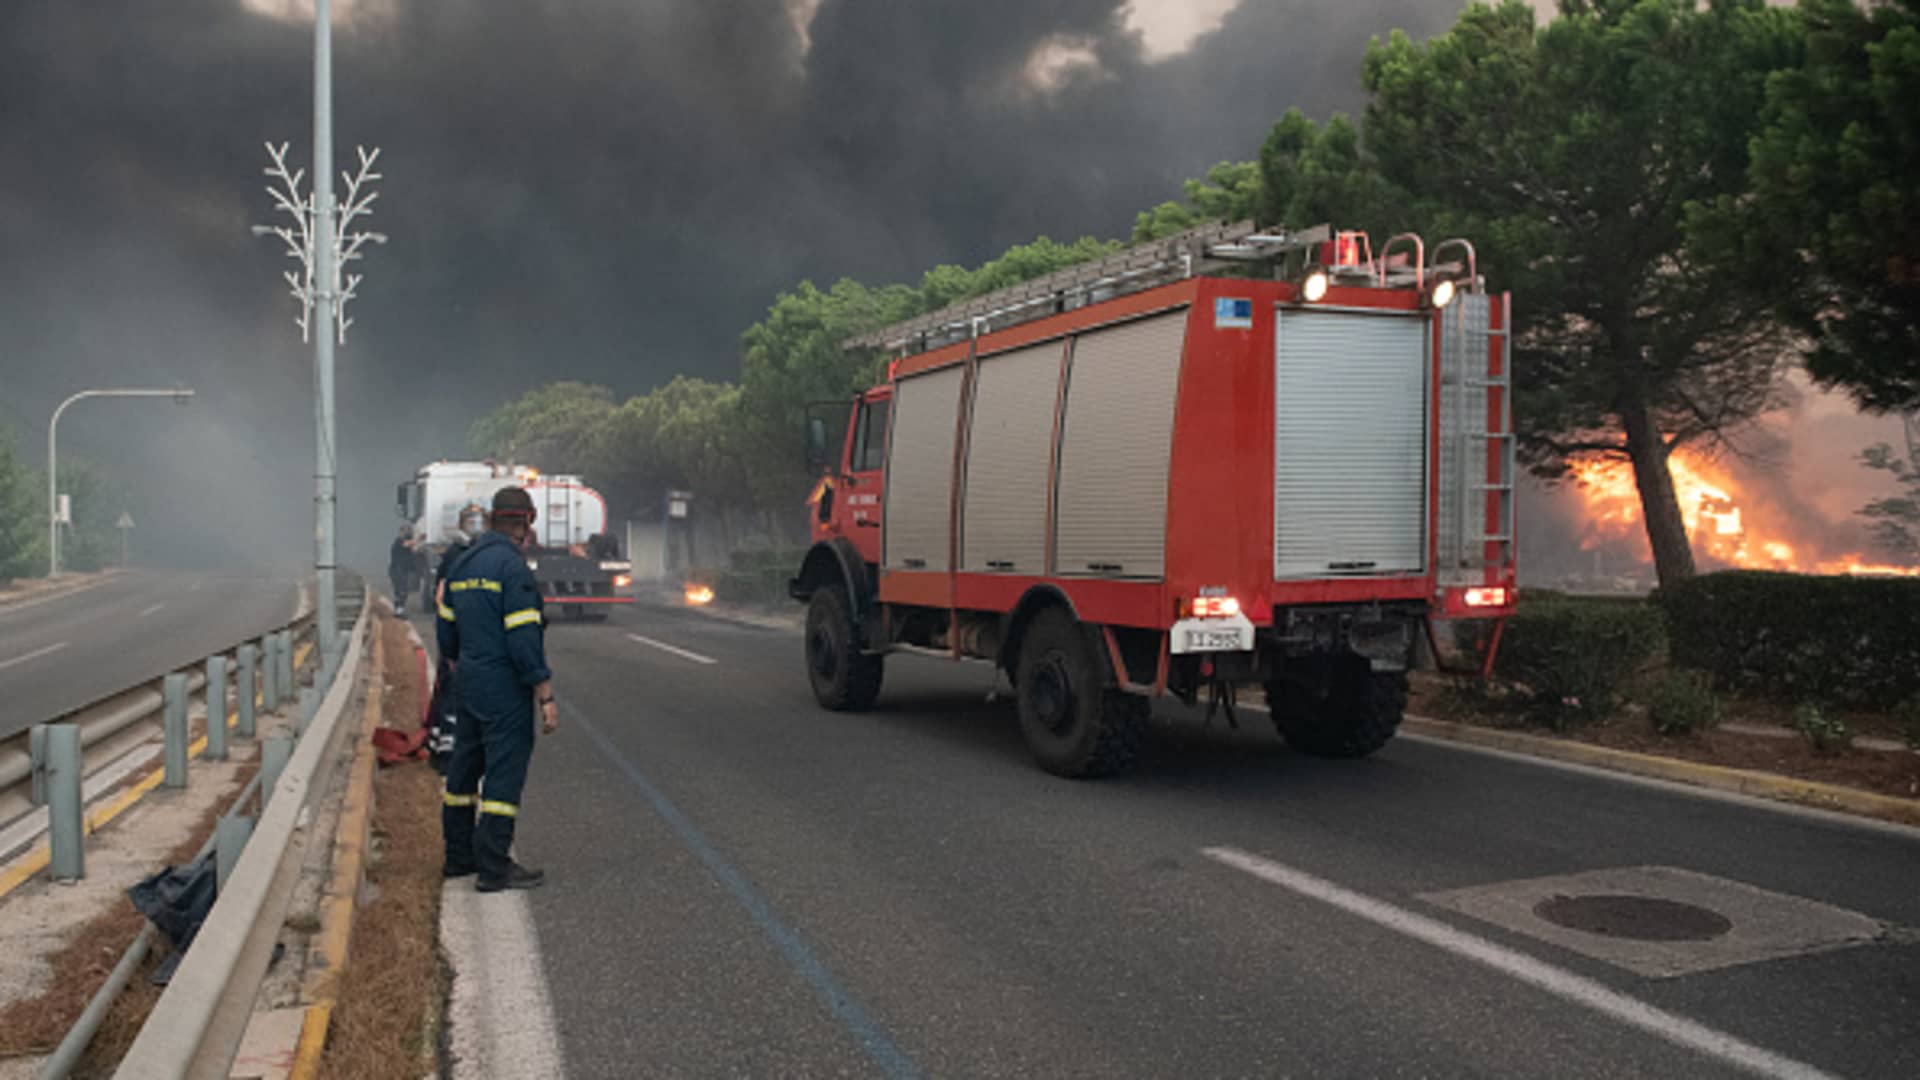 Firefighters prepare to operate as the wildfire approaches in the region of Pallini. A wildfire rages for a second day in Mount Penteli near Athens in Greece causing extensive property damages.